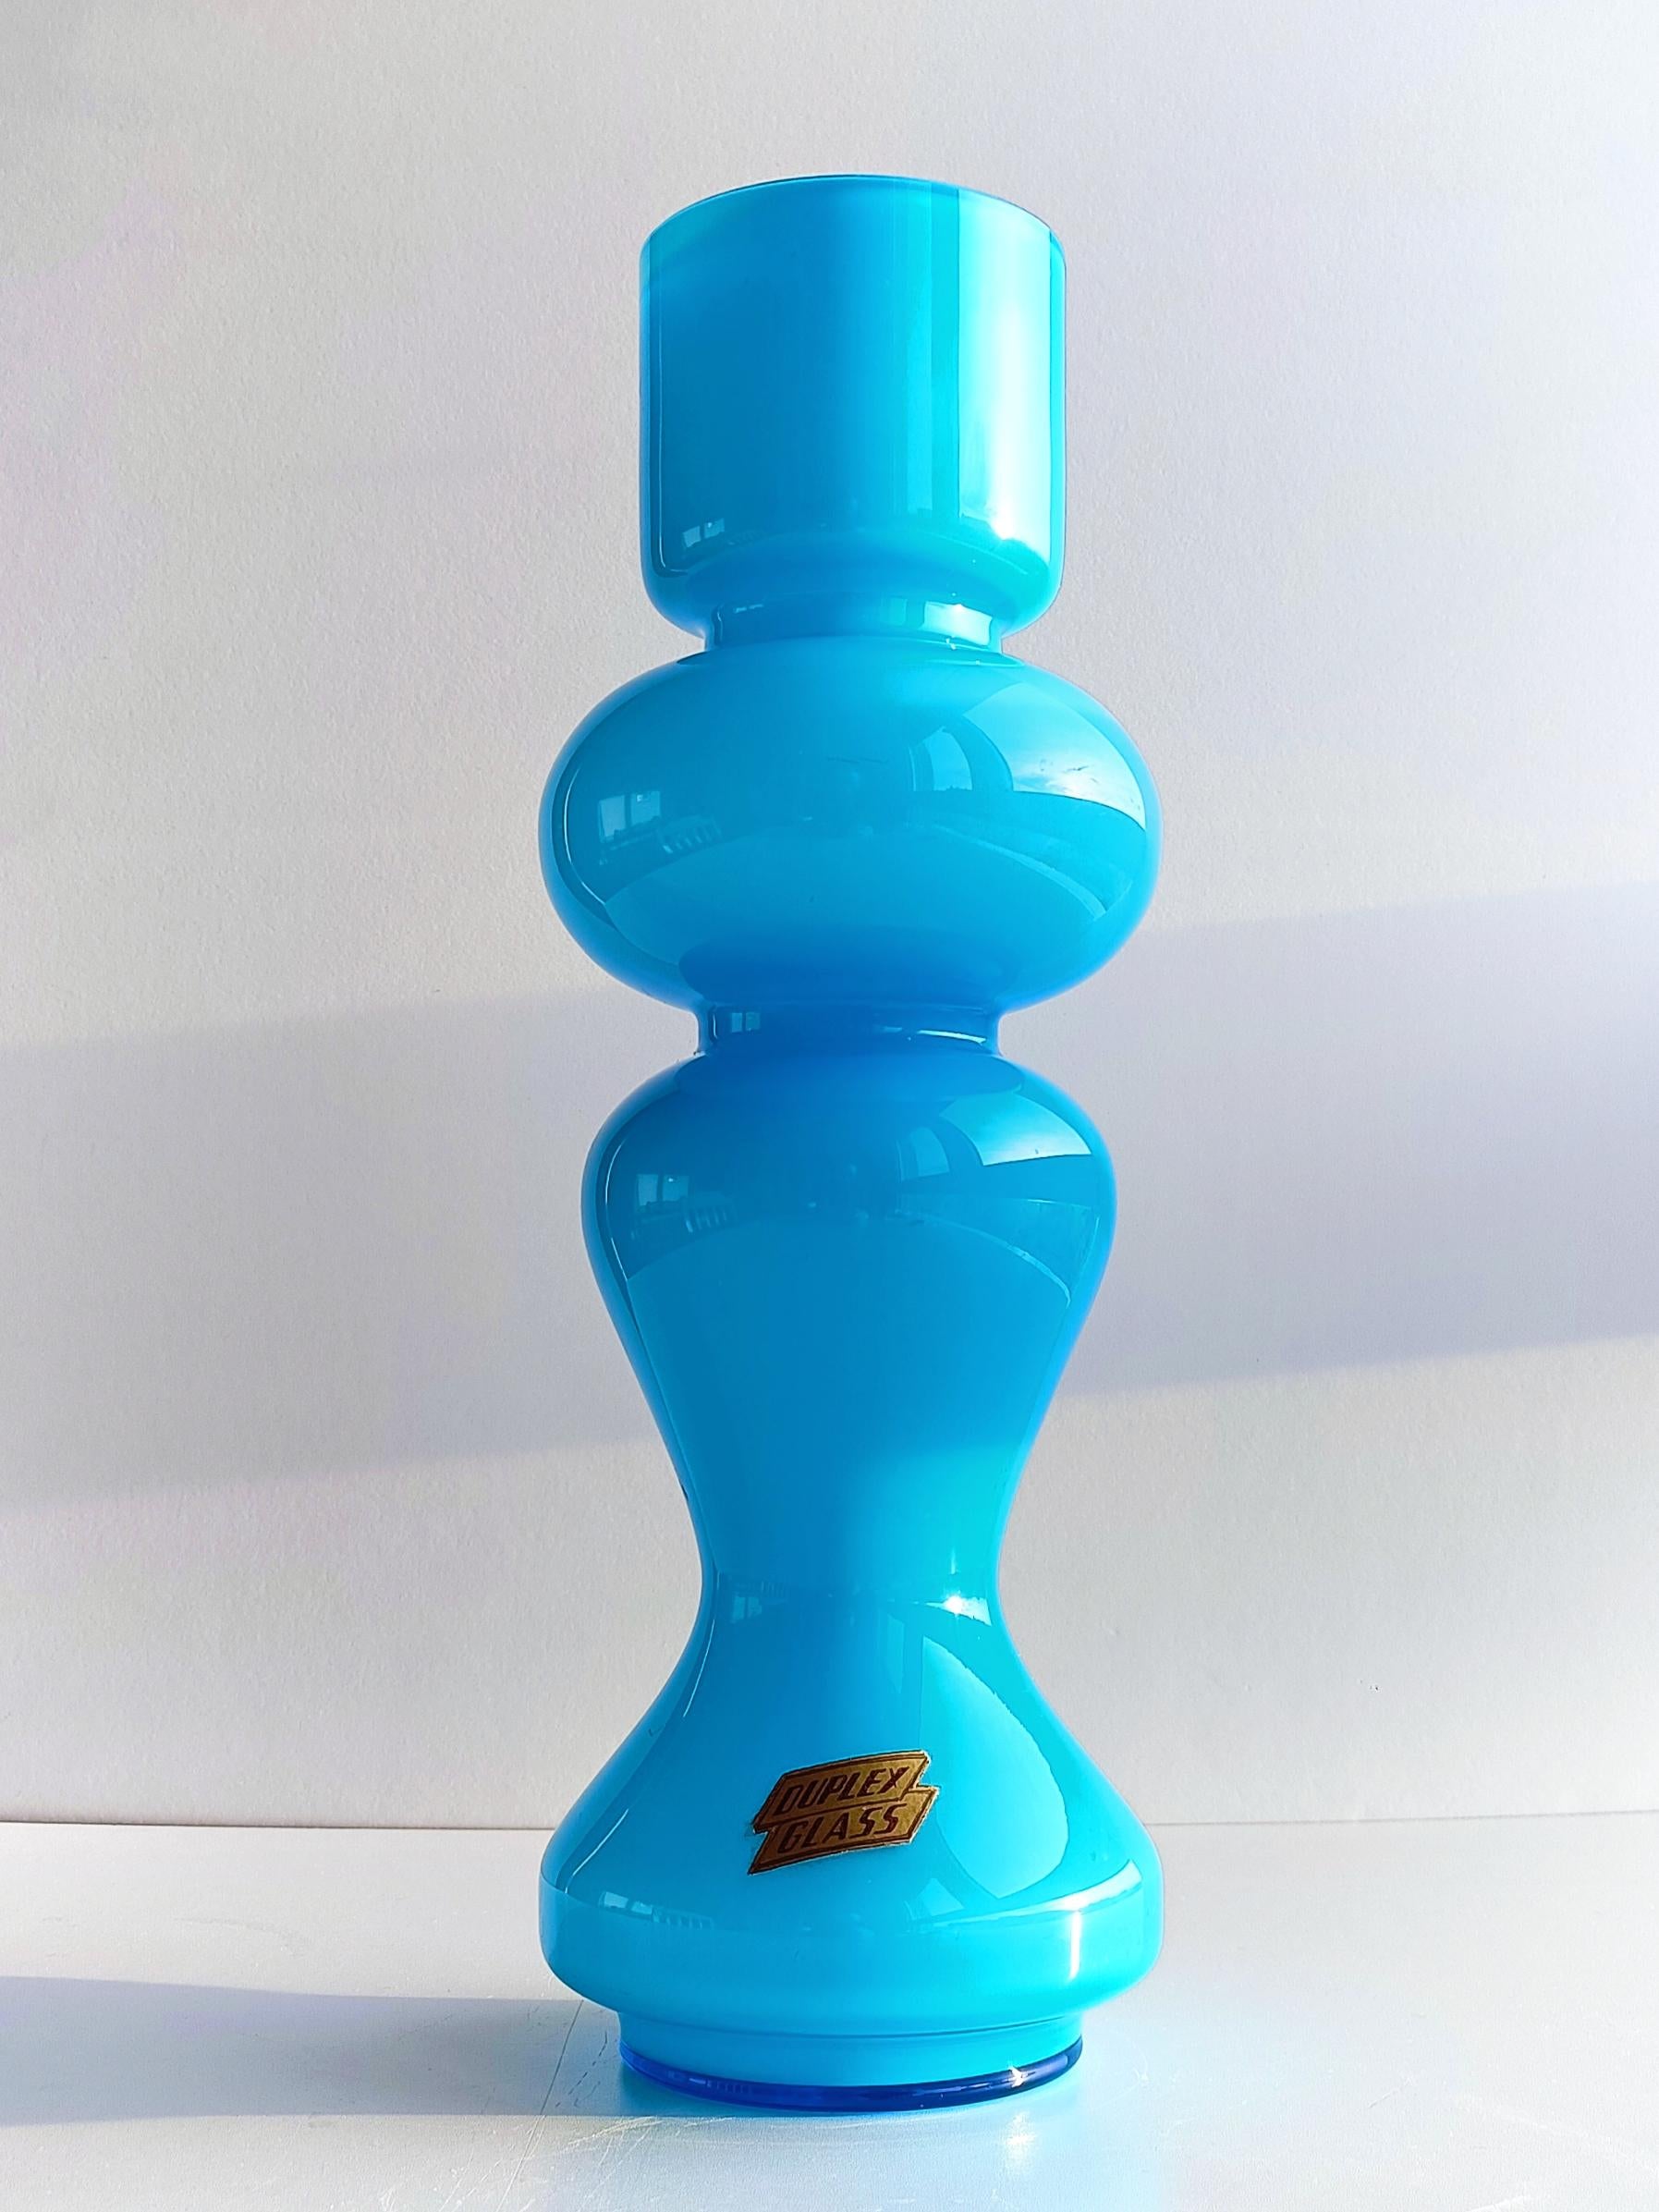 Empoli Scandinavian style Carnaby hooped vase featuring a beautiful turquoise blue cased glass. The Carnaby style vases were a trend set by designer Per Lütken at the famous Danish glass company Holmegaard, circa the 1960s. This collection of